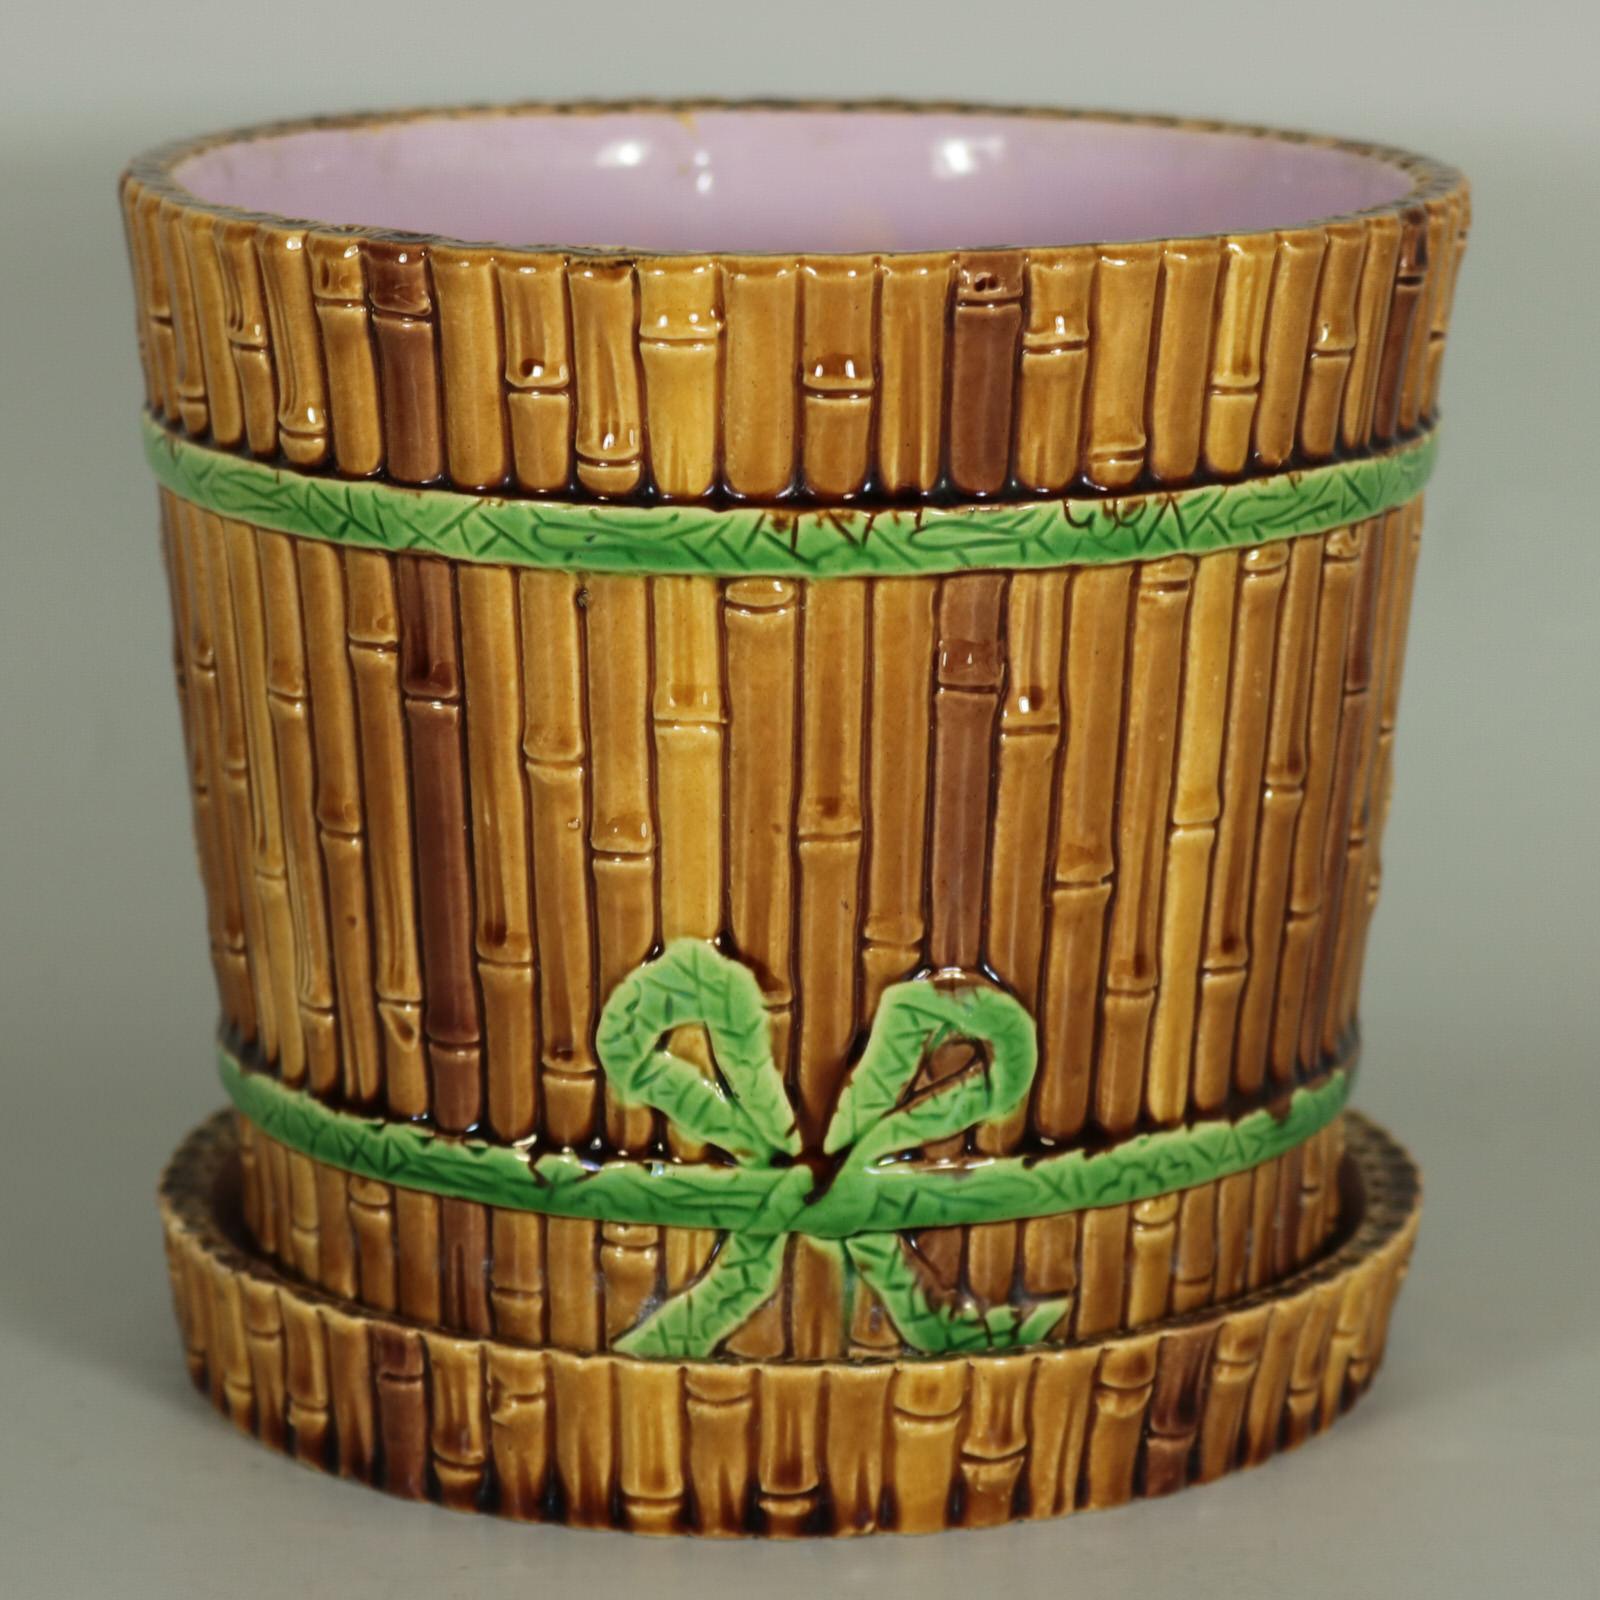 Minton Majolica planter and stand which features bamboo cane-effect sides, bound together with green ribbon. Brown ground version. Coloration: brown, green, pink, are predominant. The piece bears maker's marks for the Minton pottery. Marks include a